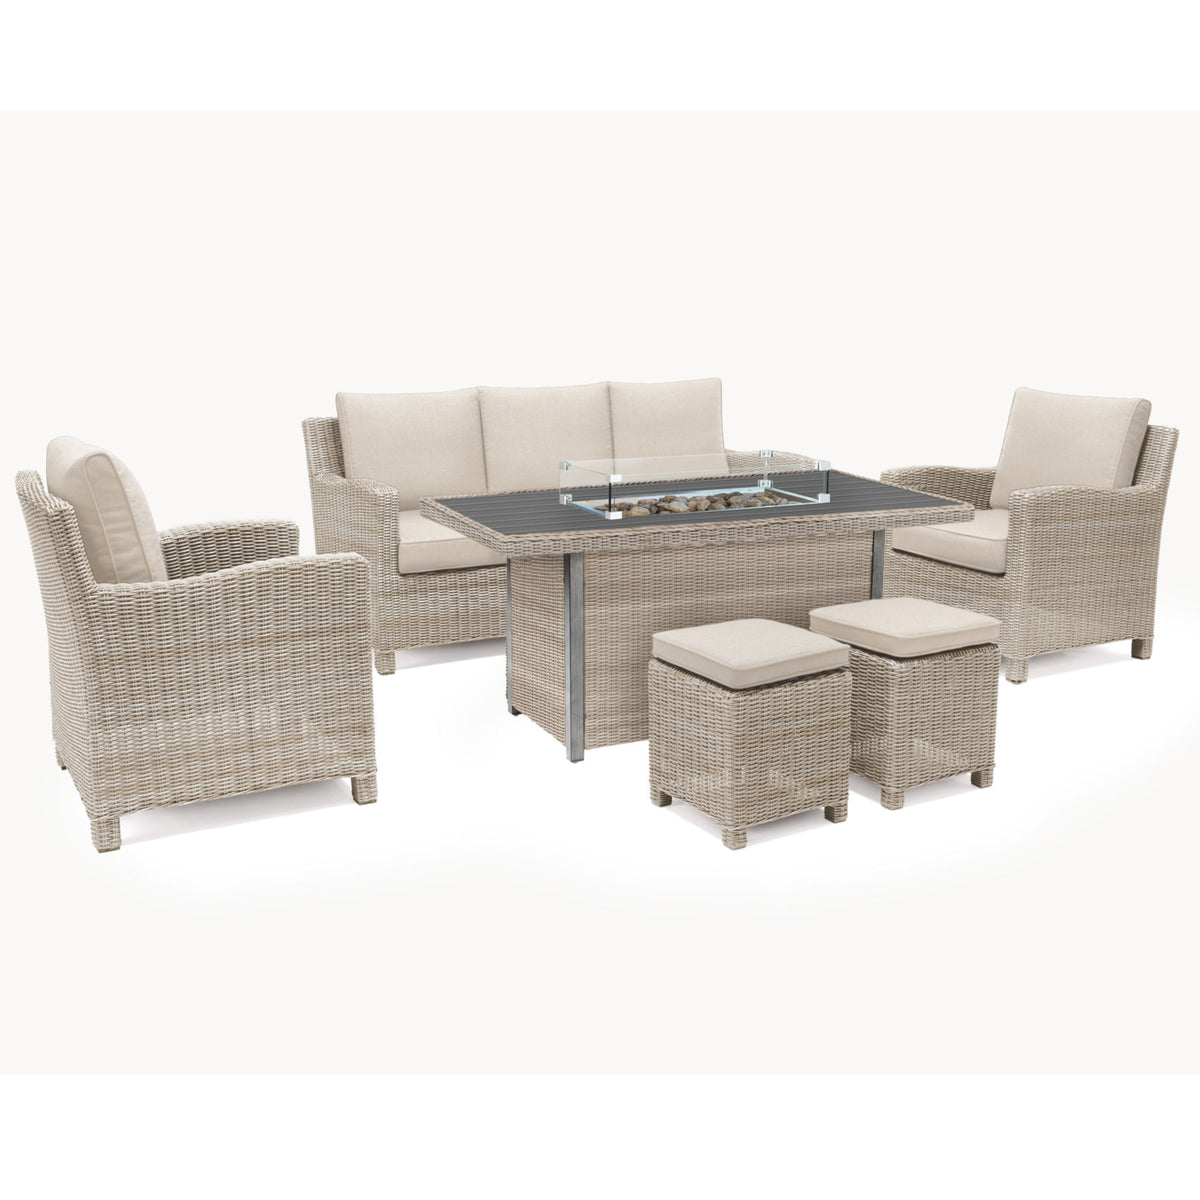 Kettler Palma Oyster Wicker Outdoor Casual Dining Lounge Sofa Set with Fire Pit Table